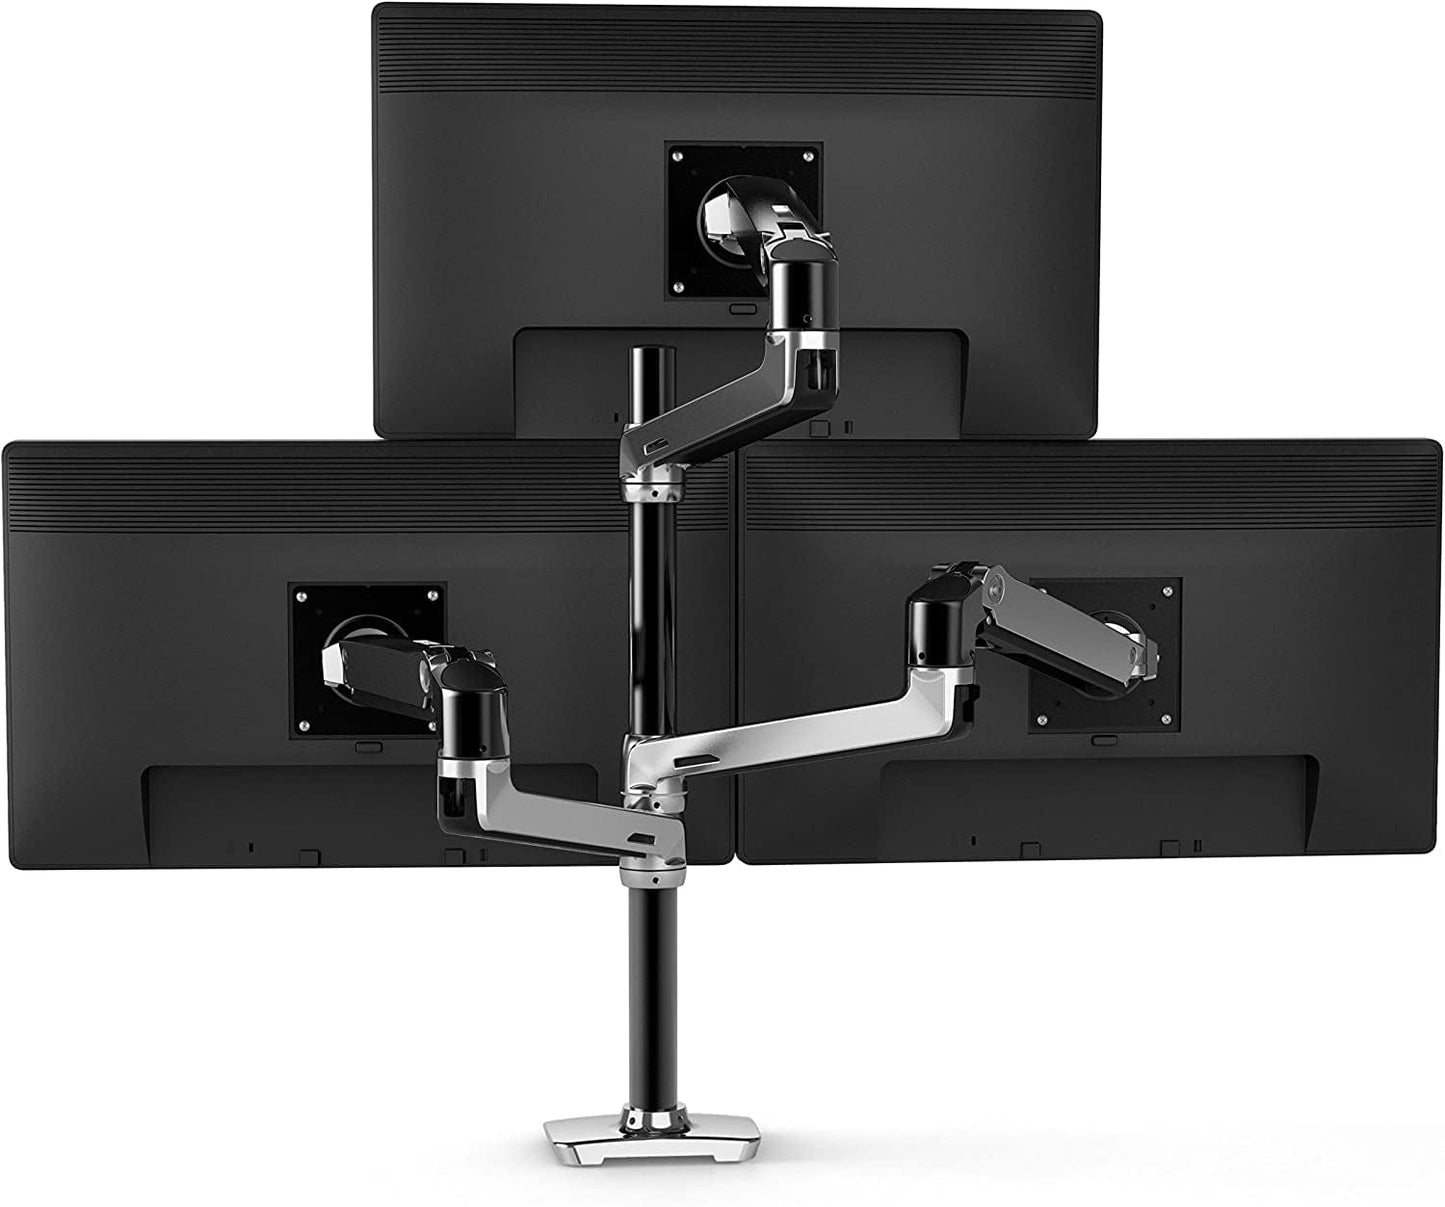 Vertical Stacking Dual Monitor Arm, VESA Desk Mount 2 Monitors up to 40 Inches 7 to 22 Lbs Each New